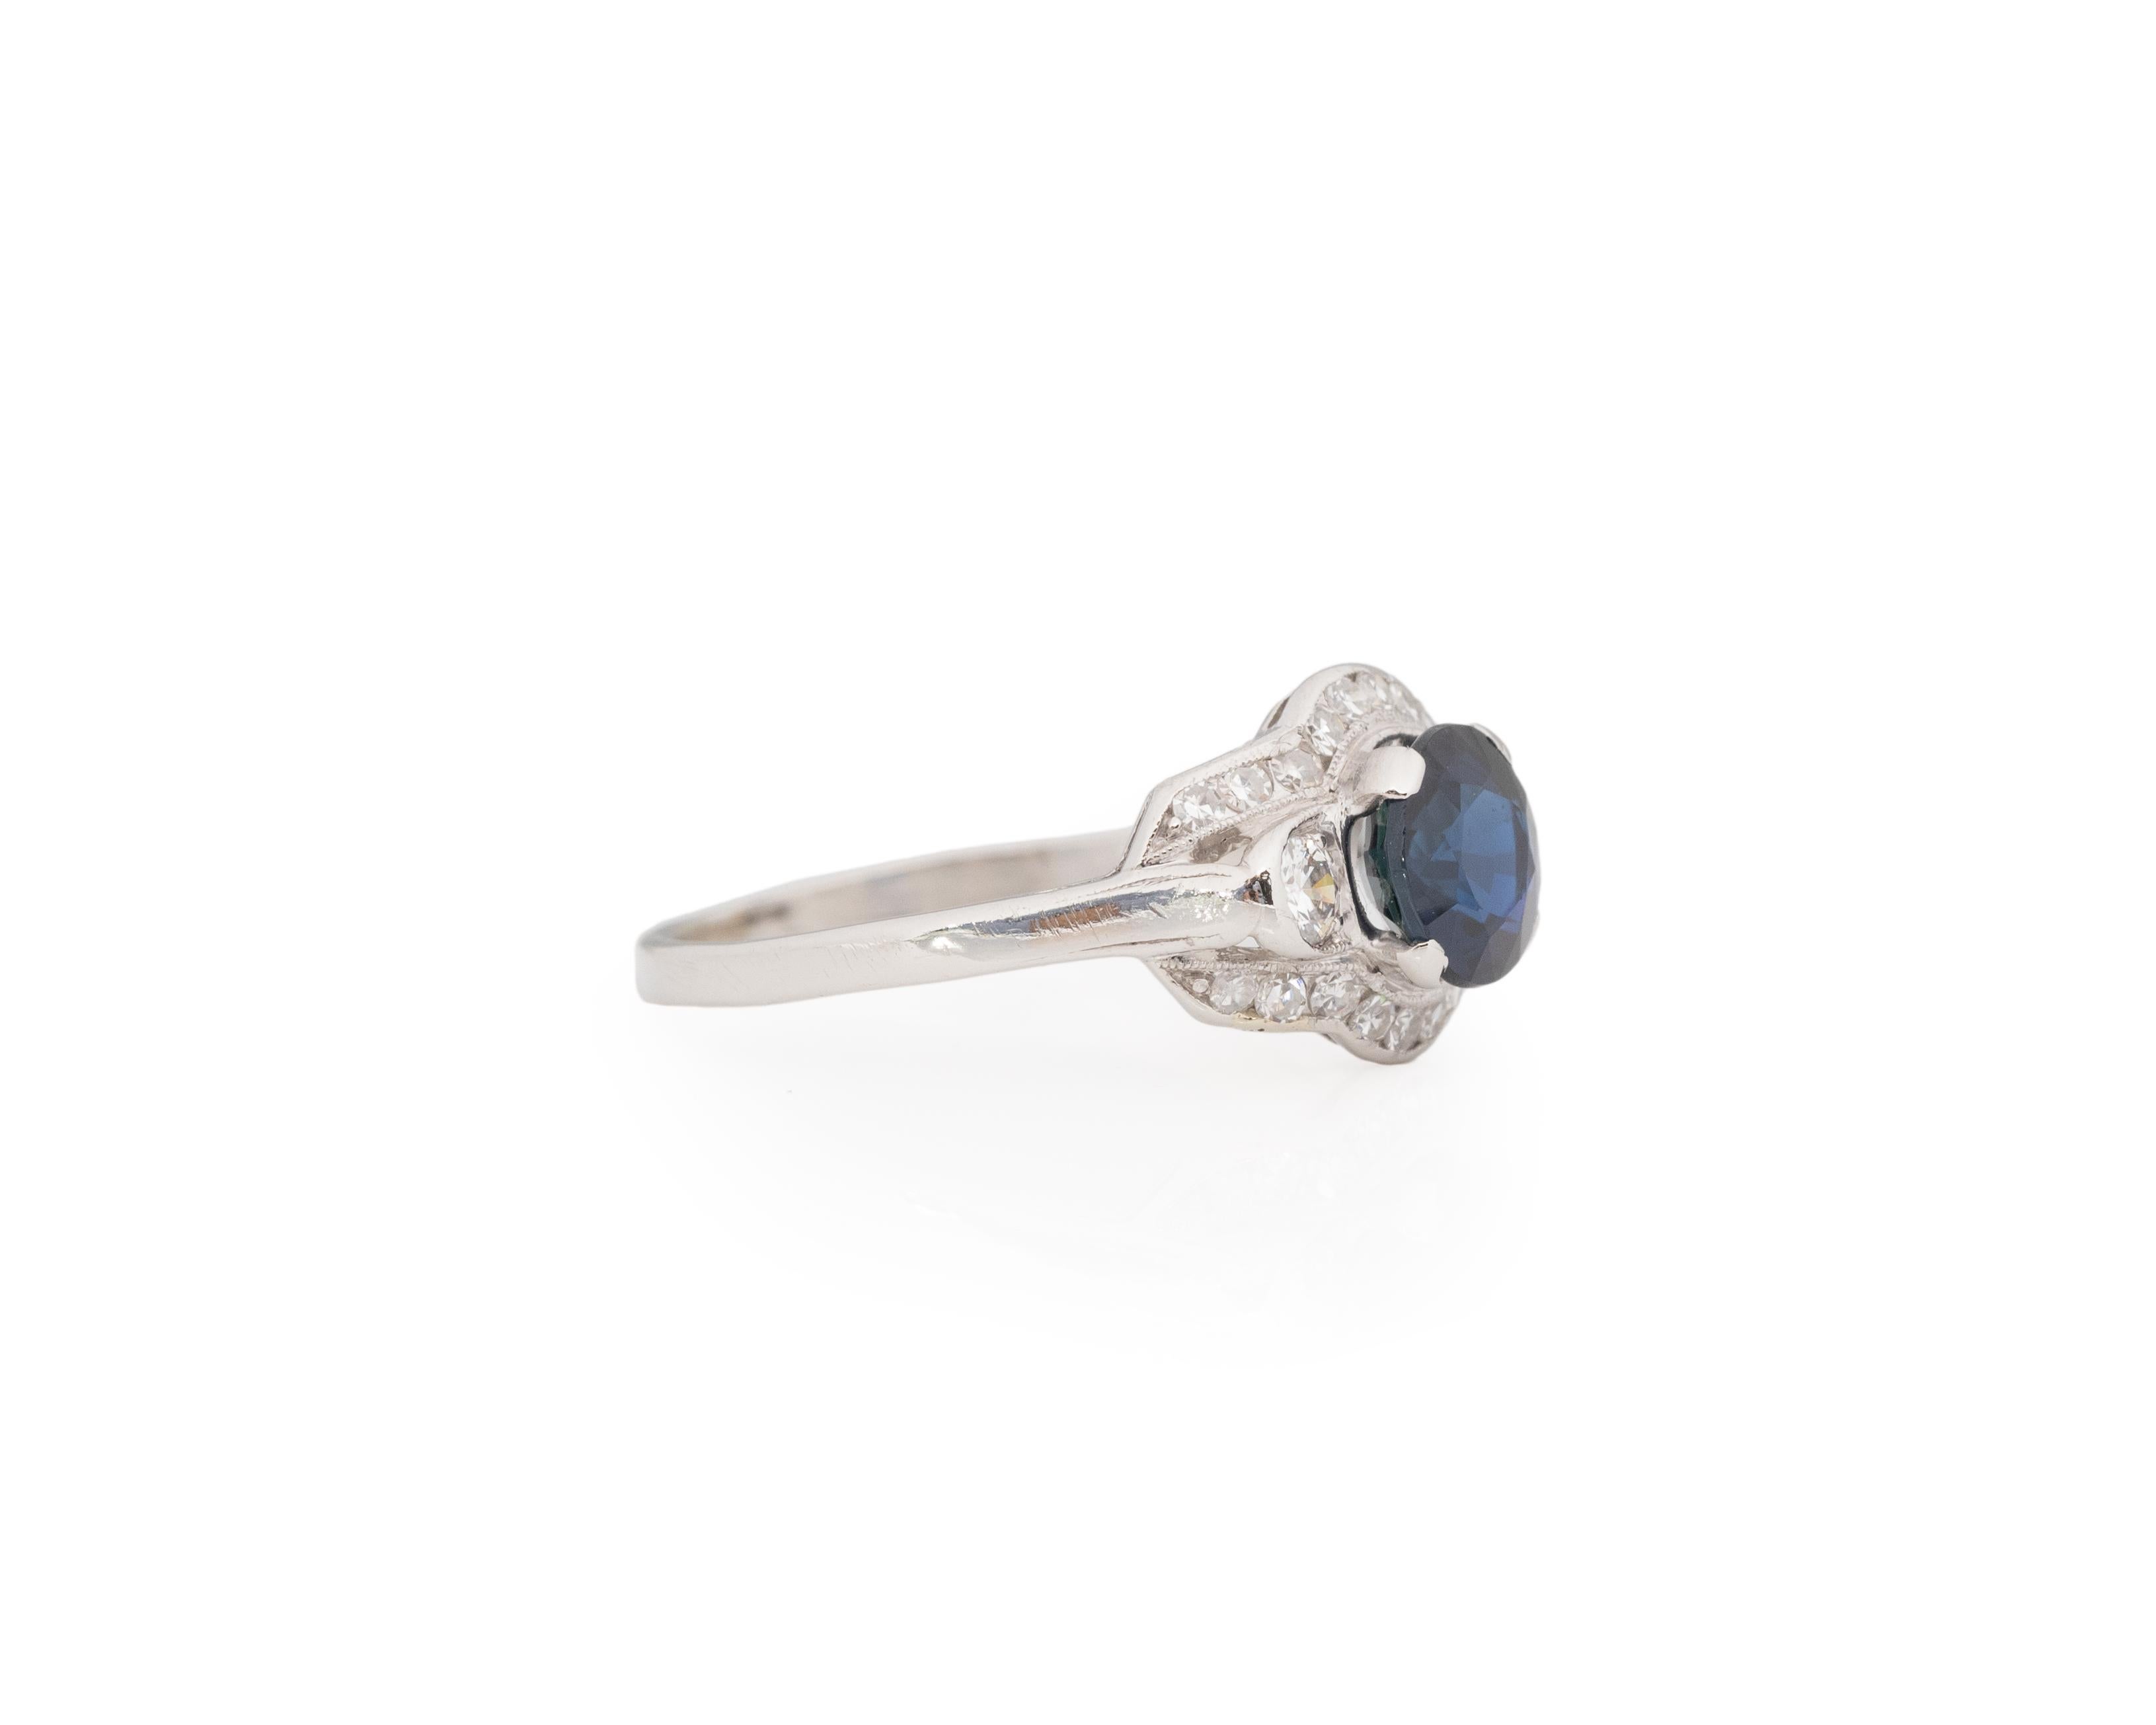 Ring Size: 8.25
Metal Type: Platinum  [Hallmarked, and Tested]
Weight: 4.4 grams

Center Diamond Details:
PGS LAB REPORT #: 44060013
Weight: 1.58 carat 
Cut: Old European brilliant
Color: Vivid Blue
Clarity: SI
Measurements: 6.93mm x 6.81mm x 4.13mm